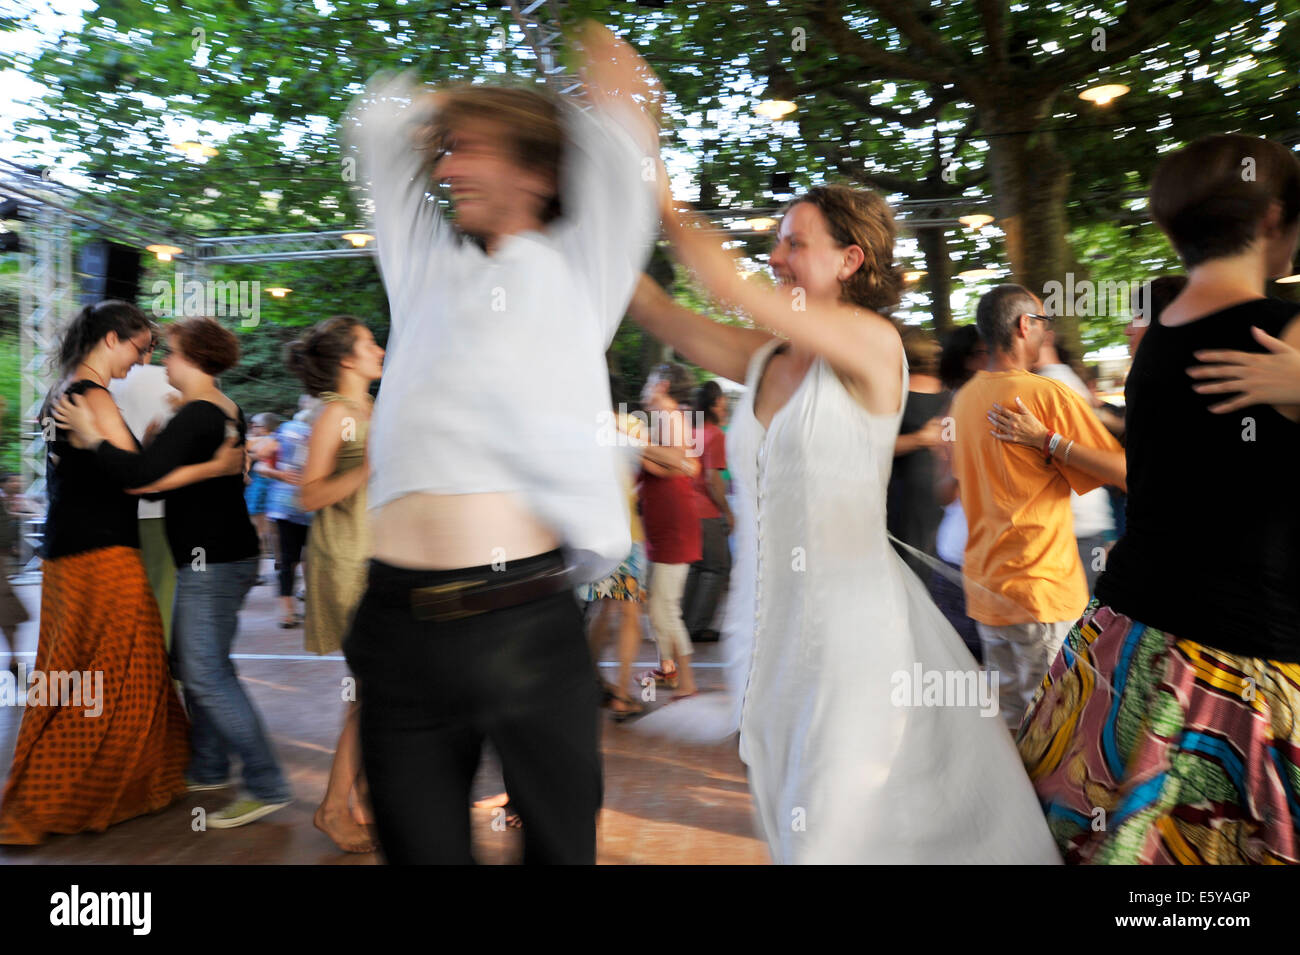 Dancing at the Bouche Oreille music festival in Parthenay Deux-Sevres  France Stock Photo - Alamy